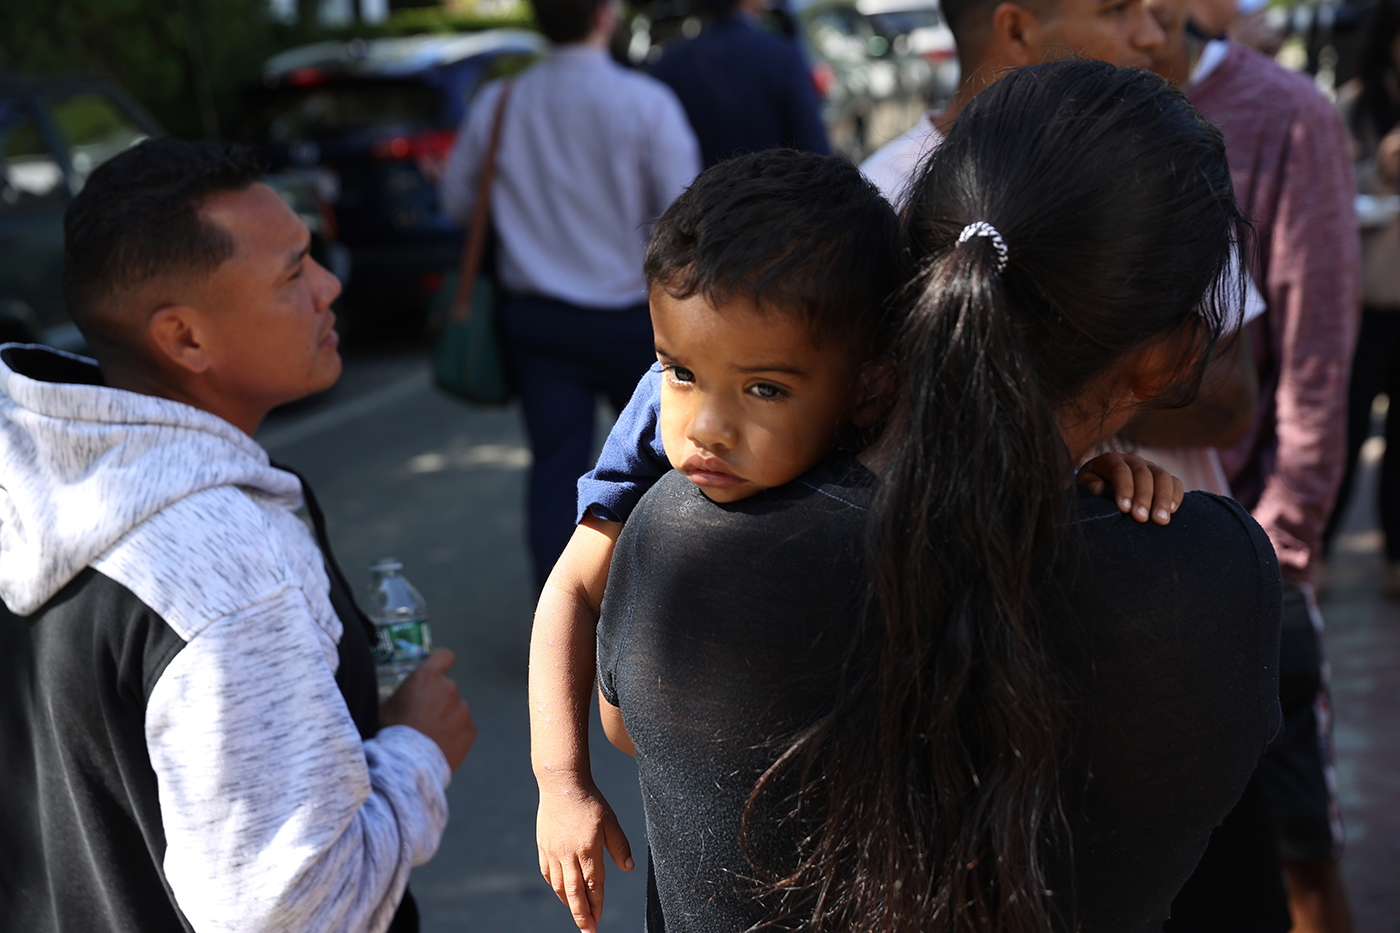 A person wearing a black jacket is holding a child while surrounded by people.ed by people.